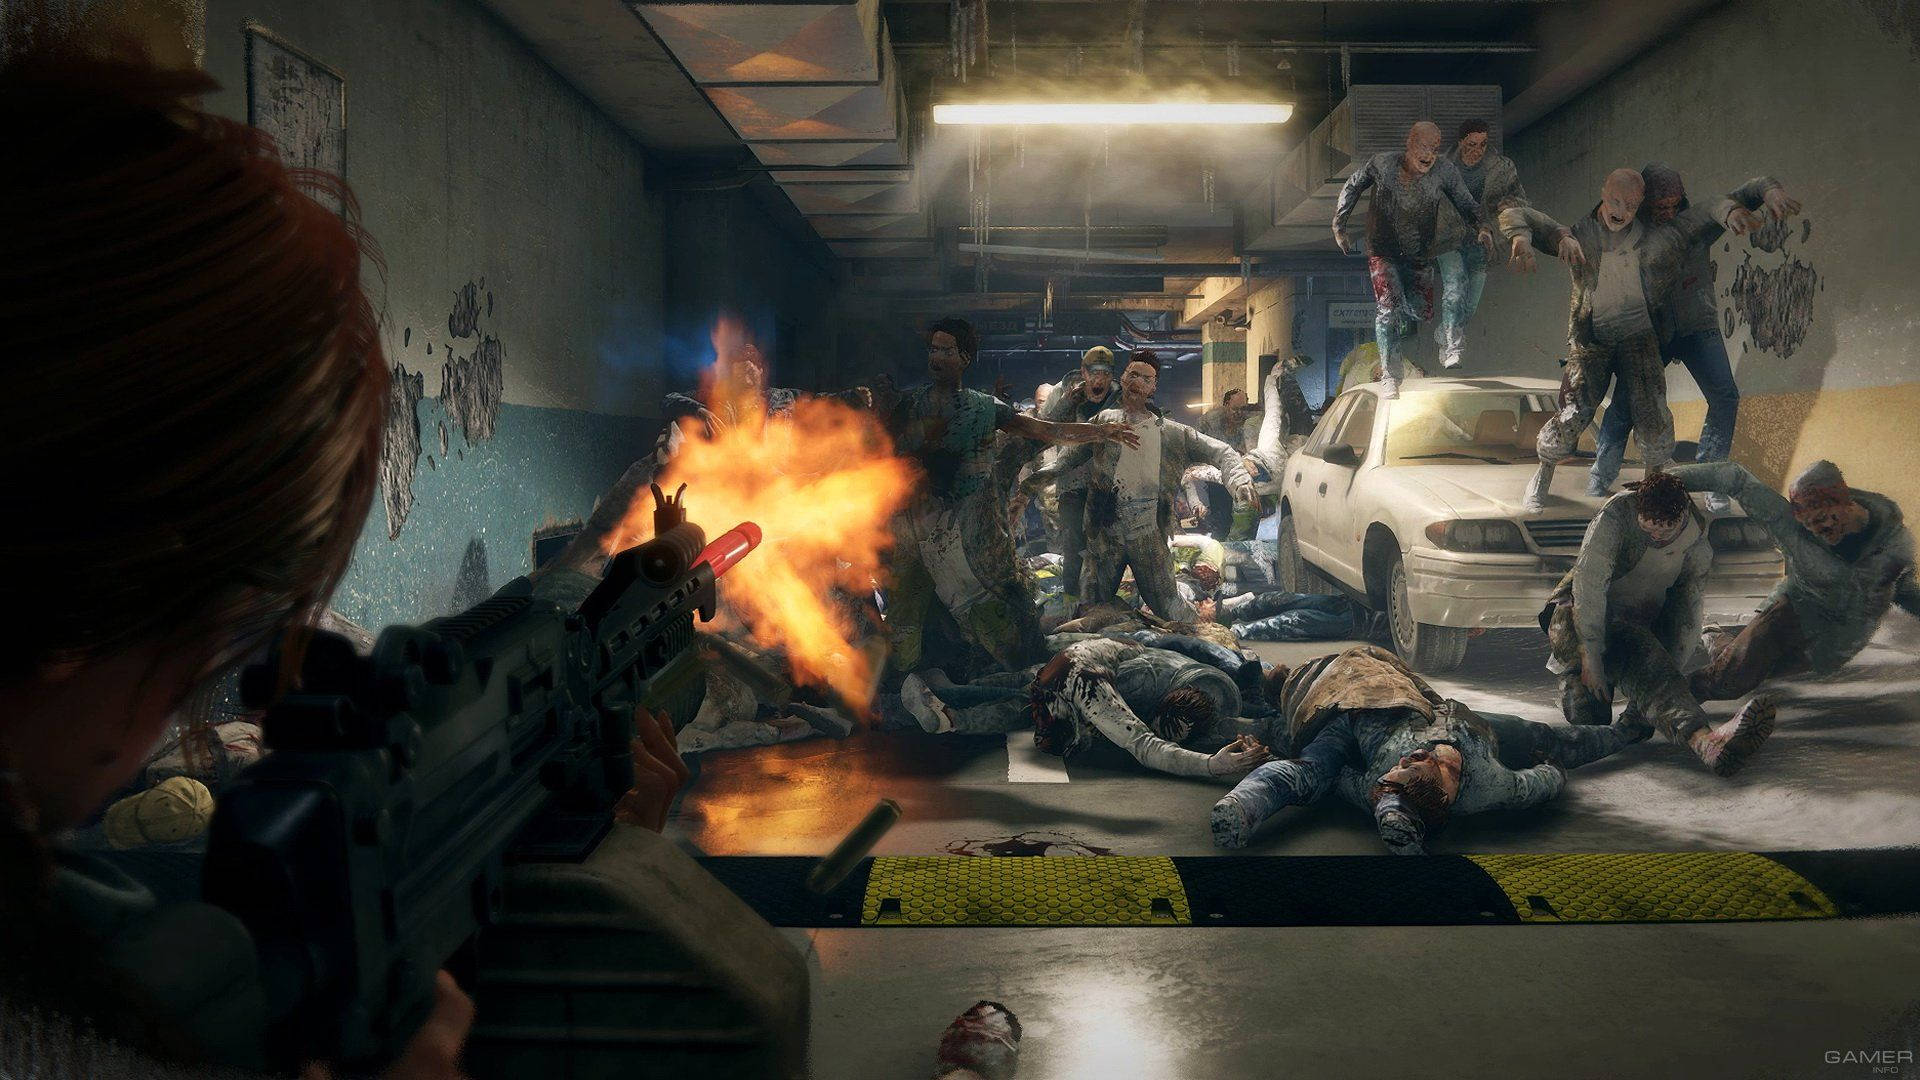 Download Intense Gameplay of World War Z Aftermath in Sewers Bunko